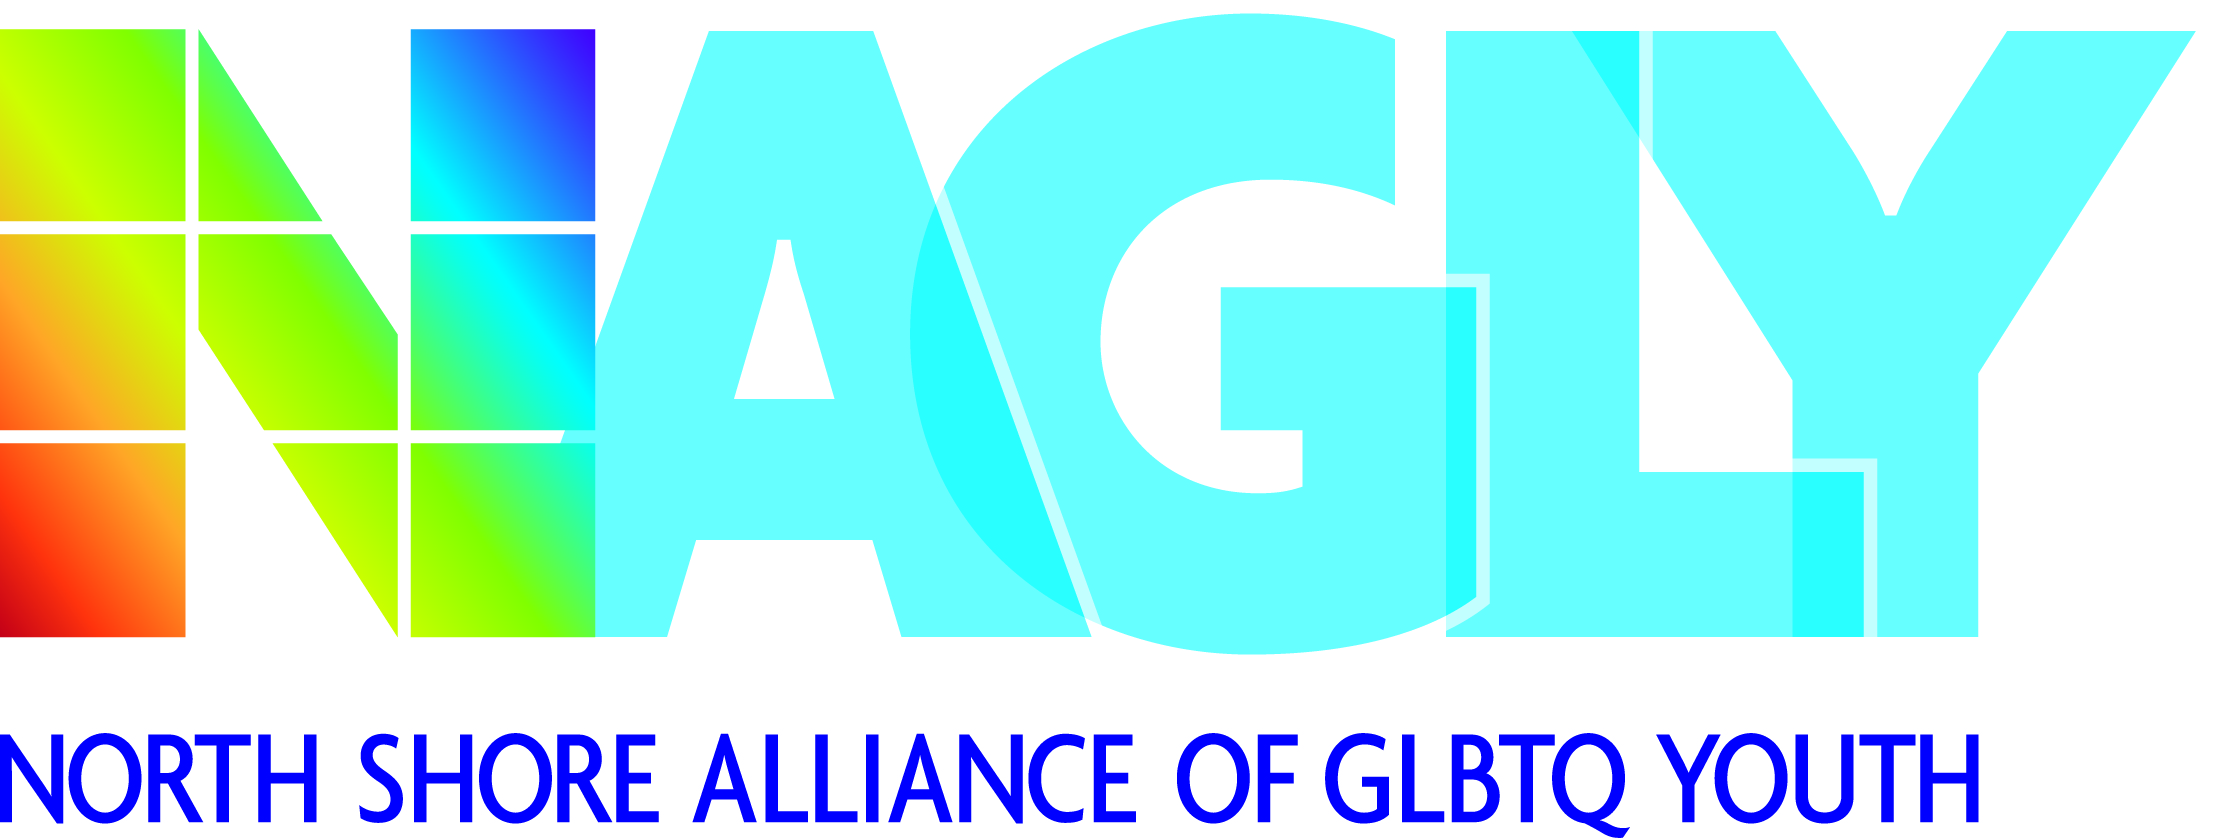 North Shore Alliance of GLBTQ Youth, Inc. (NAGLY)